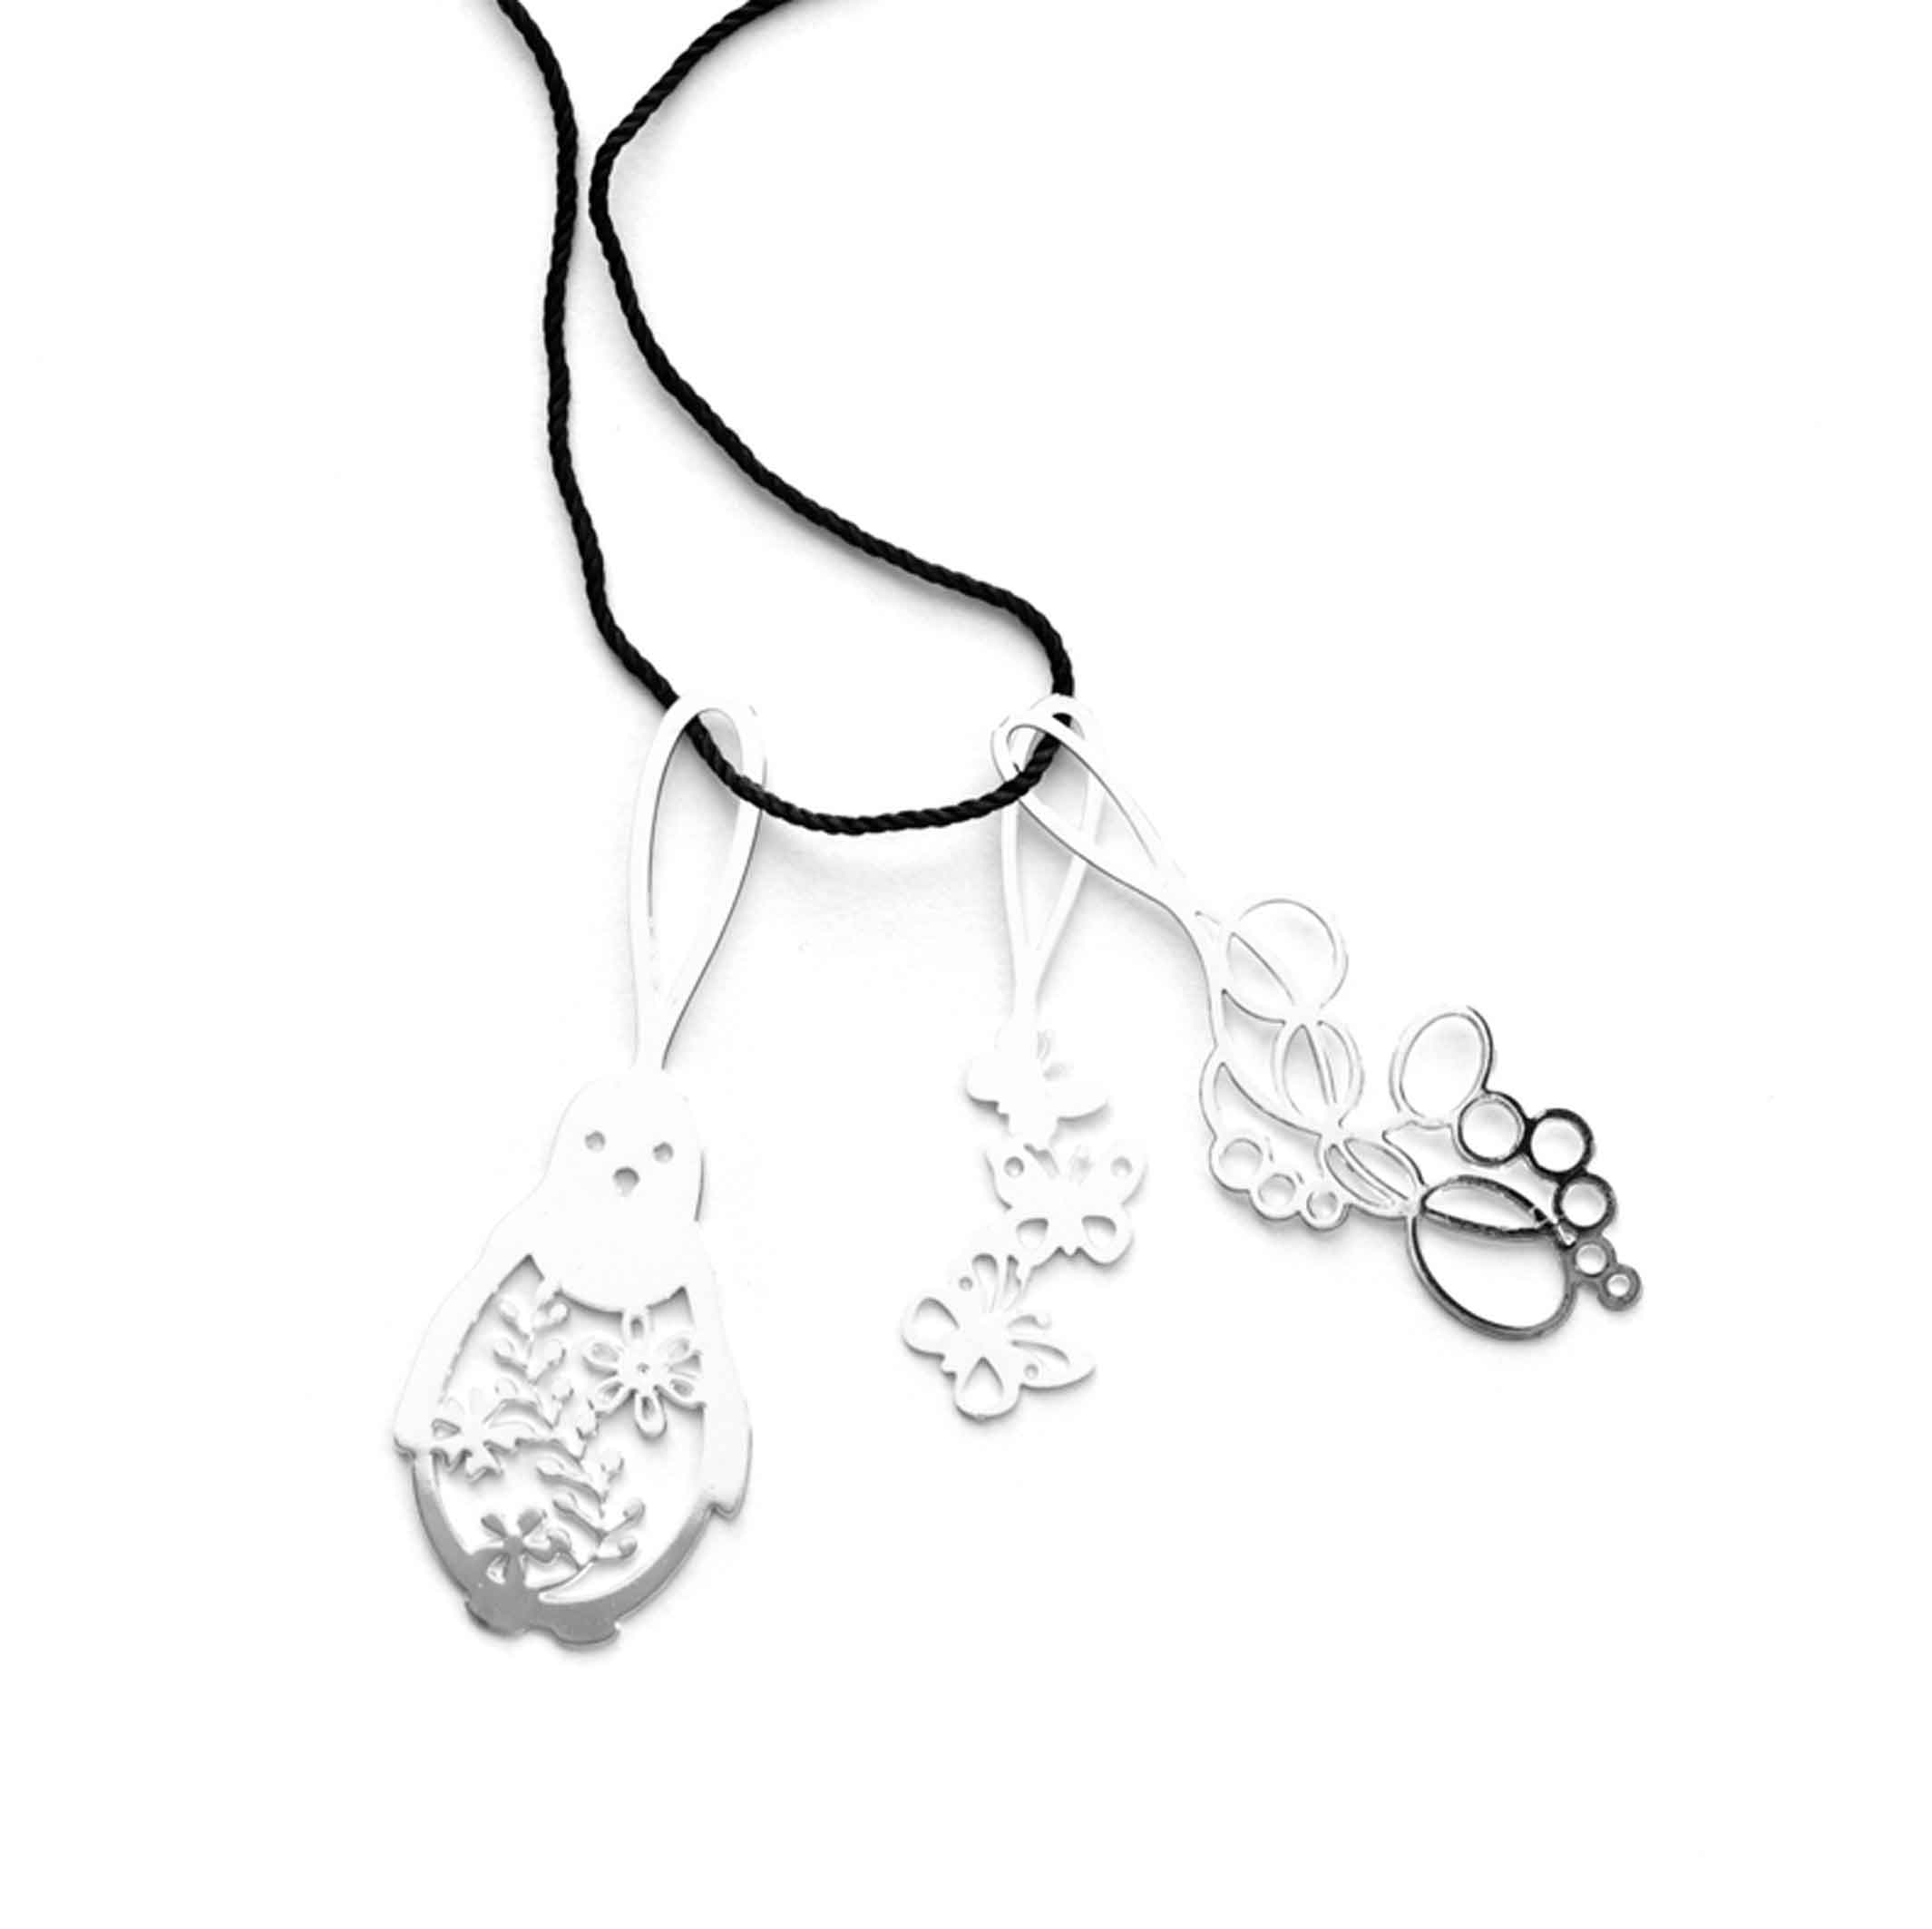 CHARMING | Set 5 | NACKLACE | Tord Boontje | Artecnica